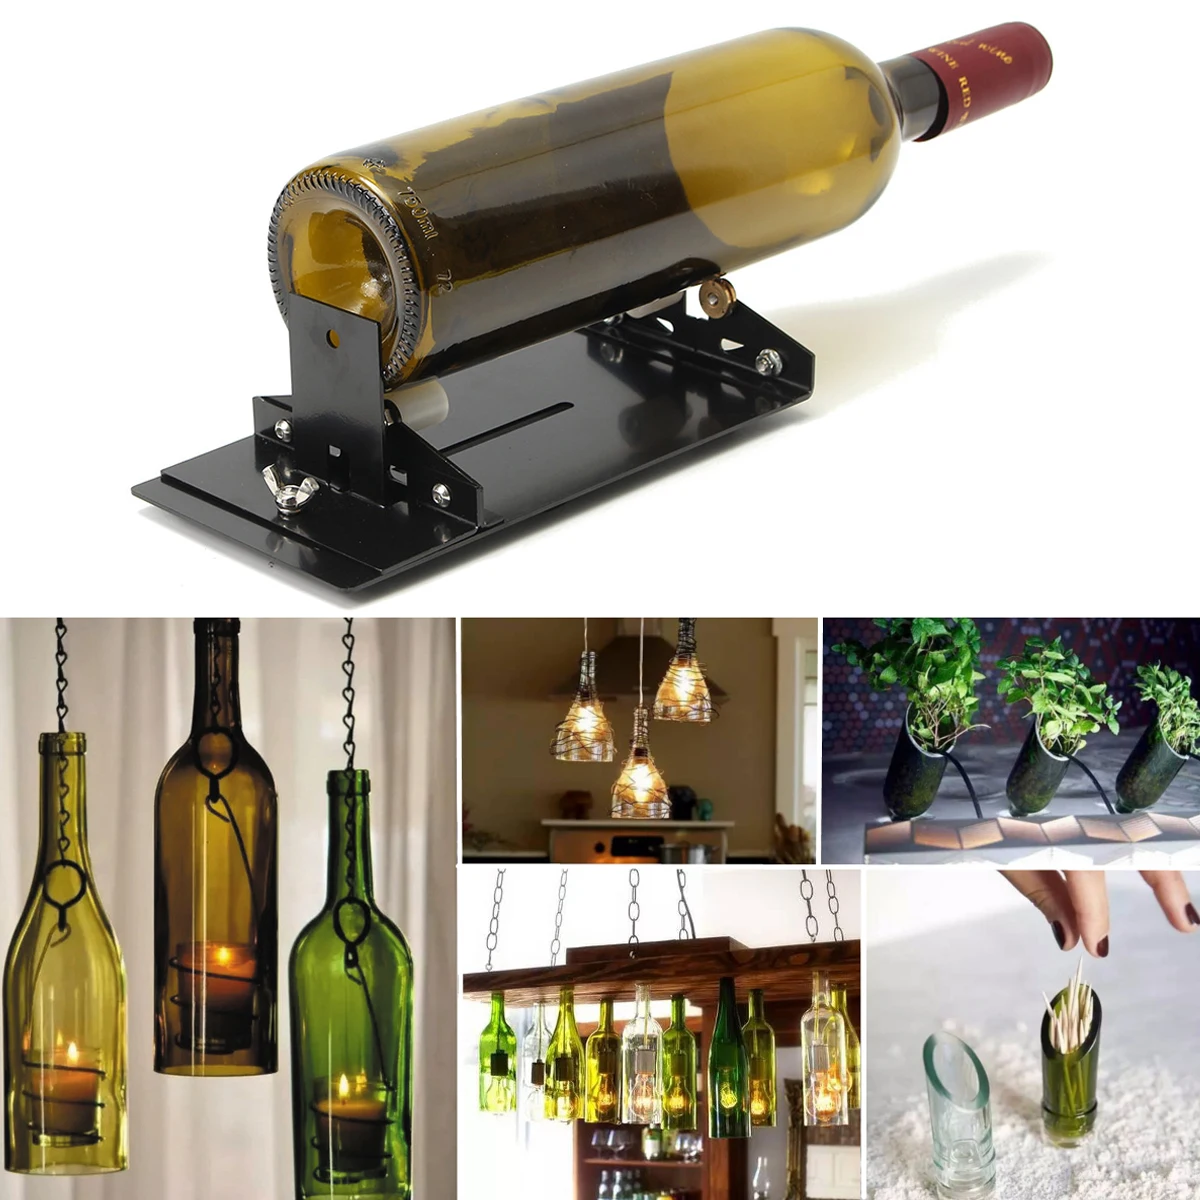 Beer Glass Wine Bottle Cutter Machine new Adjustable Kit Craft Recycle Cutting 